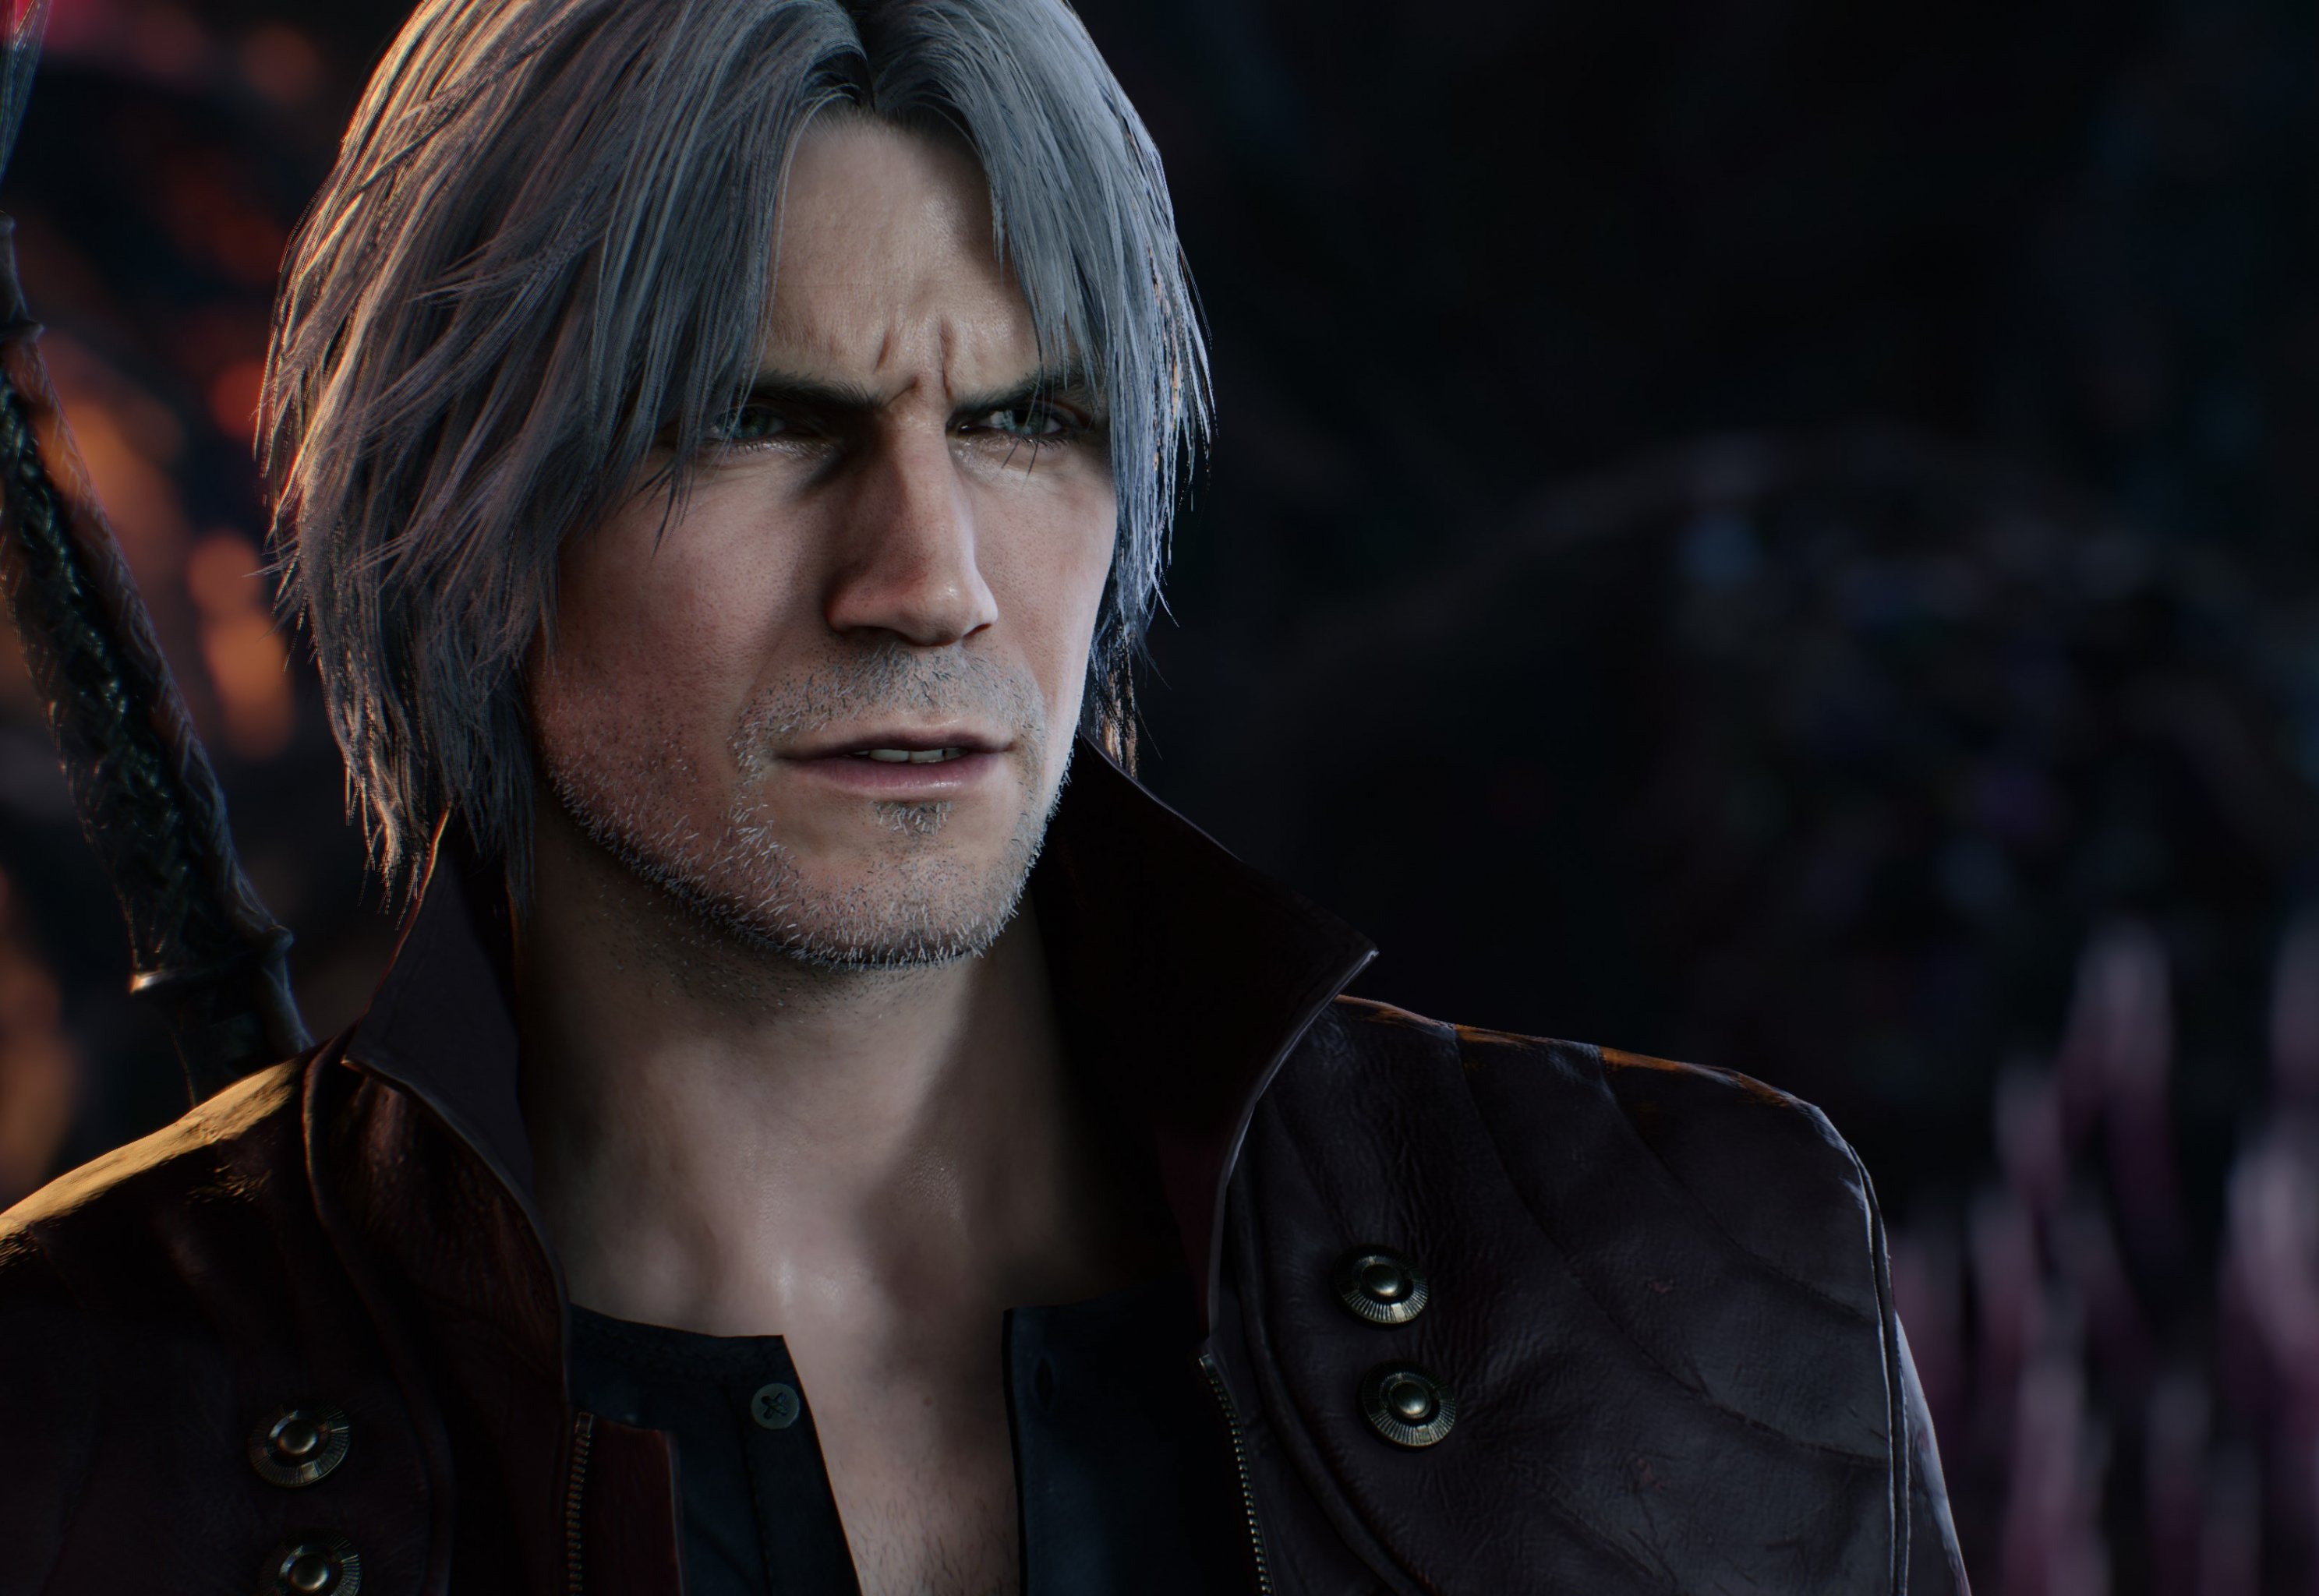 The Gameplay in 'Devil May Cry 5' is Fun, Chaotic and Deep